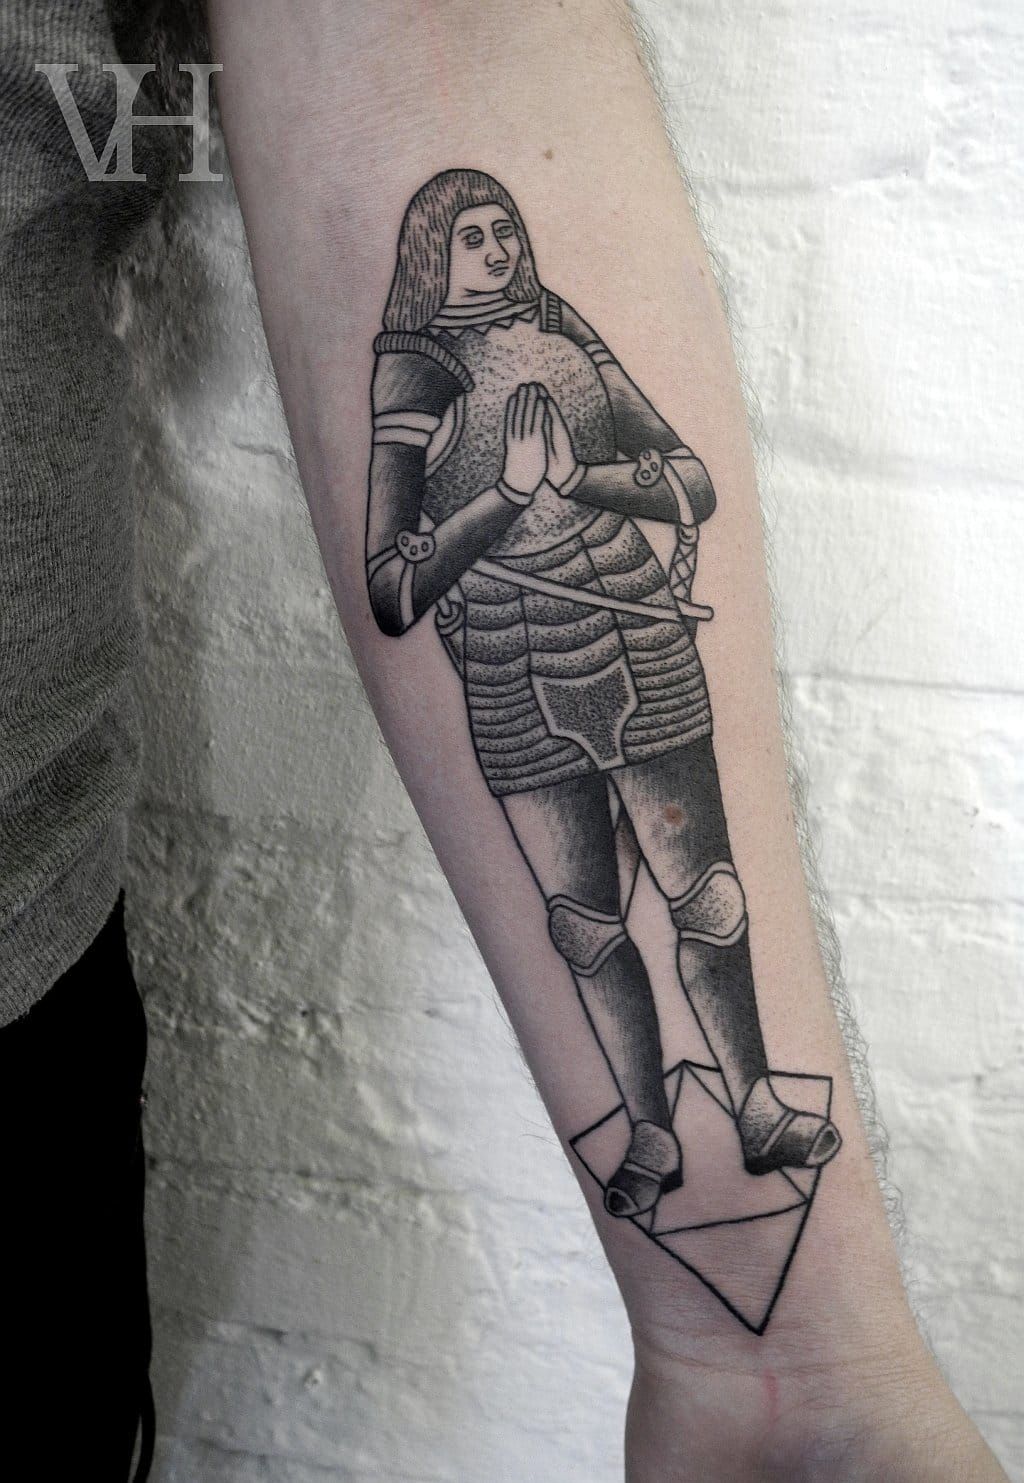 Looks like Valentin Hirsh enjoys knight tattoos... here inspired by an old illustration.